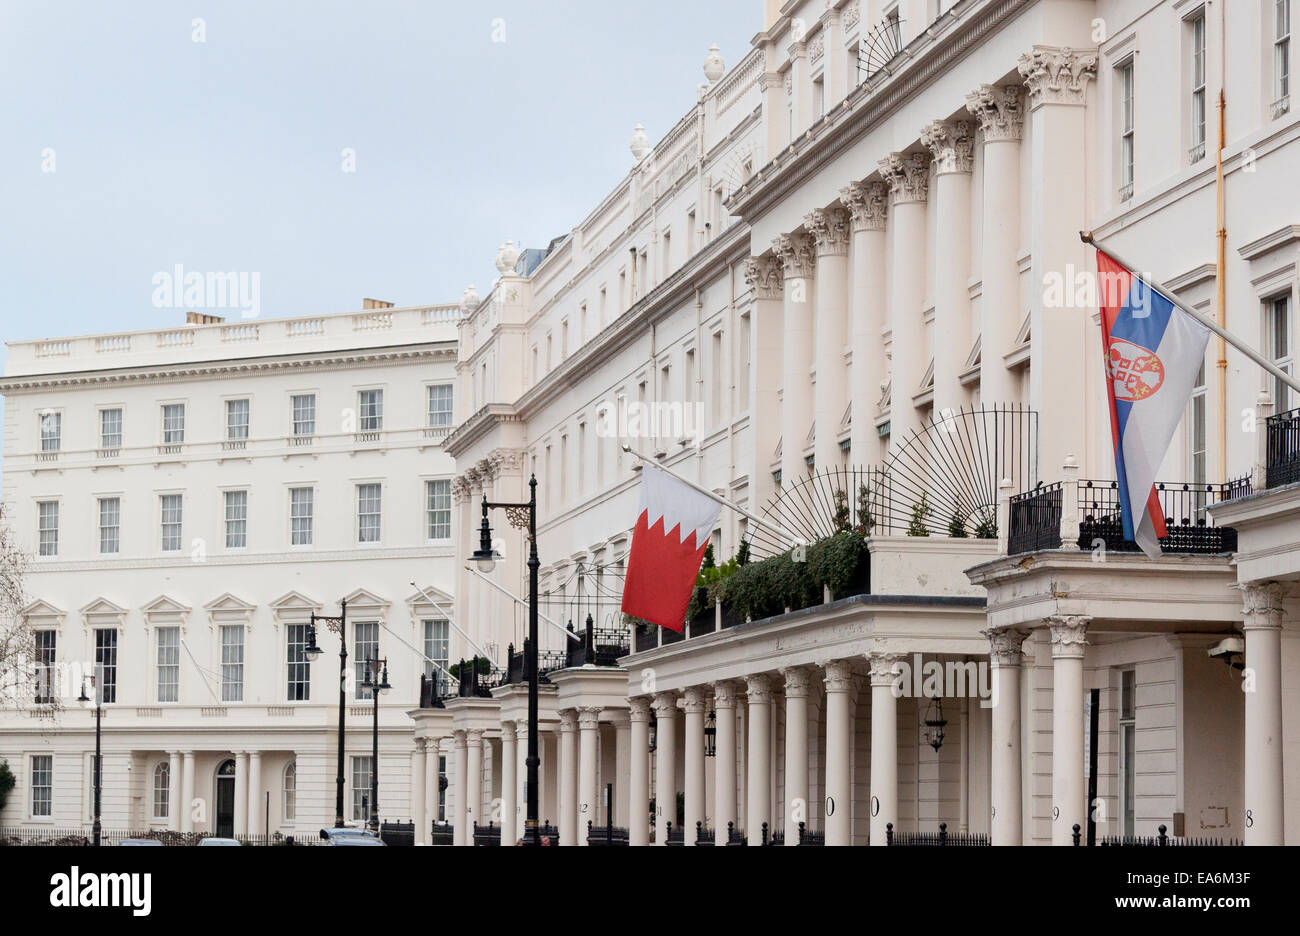 A terrace of houses in Belgravia London, many occupied by foreign embassies or consulates. This is Belgrave Square. Stock Photo